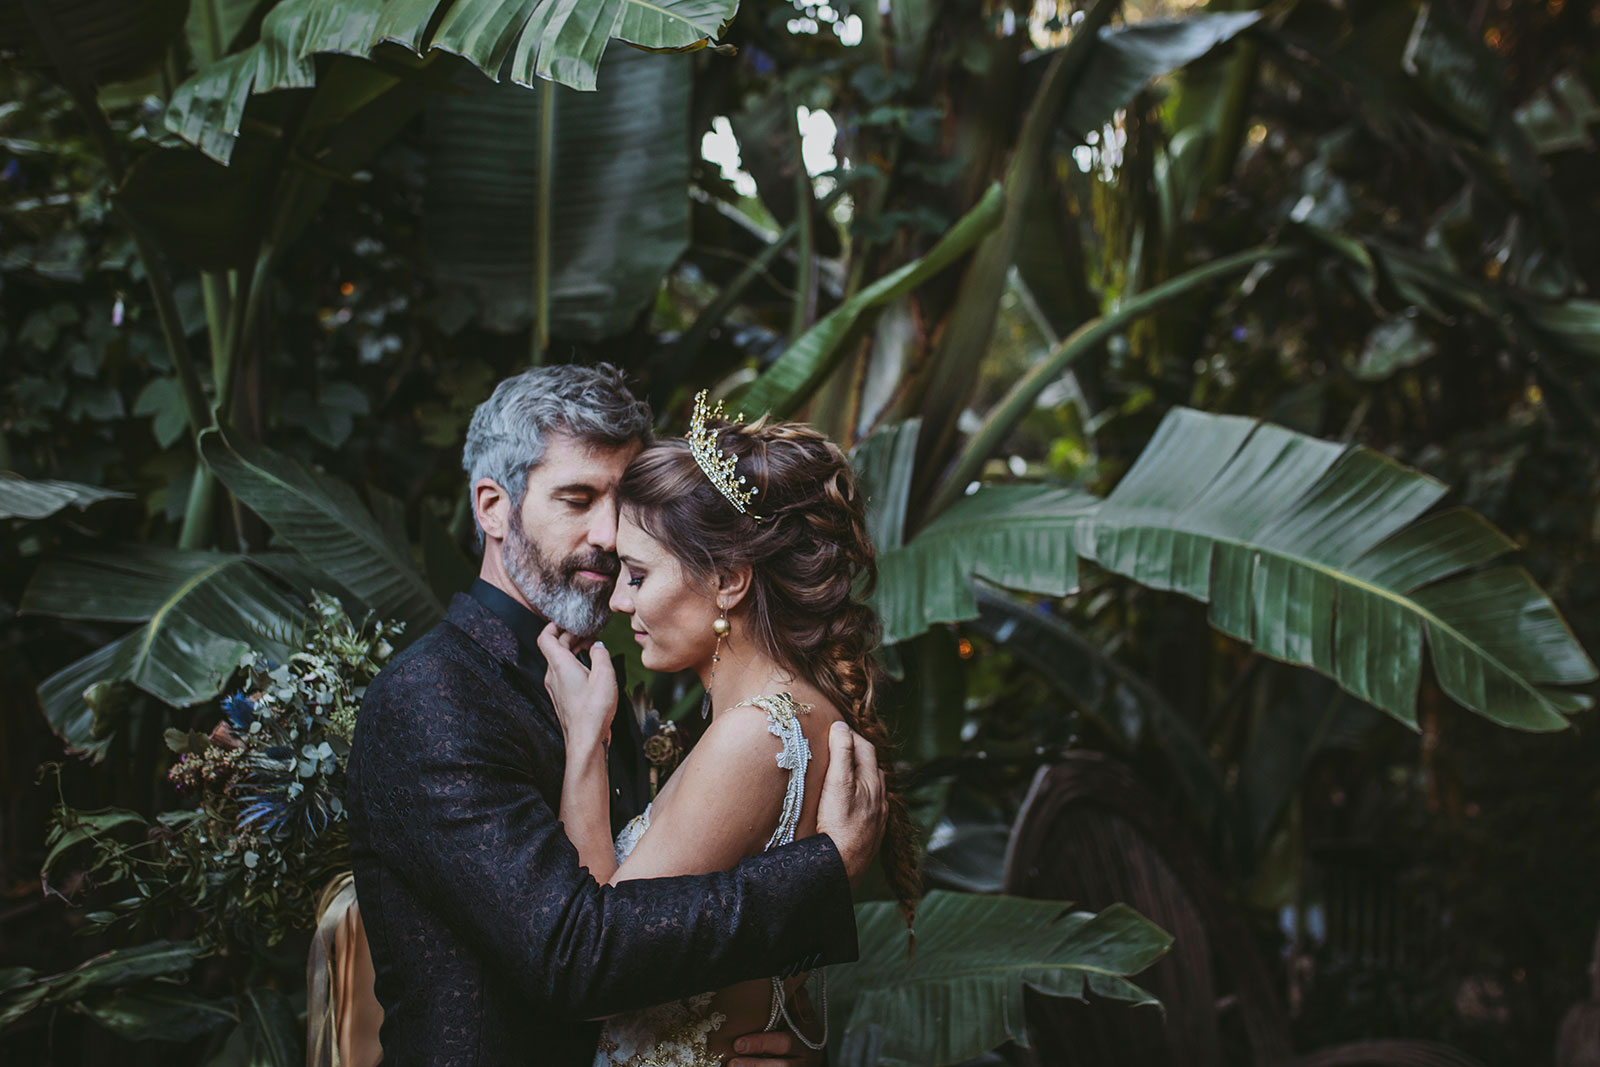 Bride and groom share a sweet moment in the lush gardens of The Holly Farm at this Carmel Wedding.